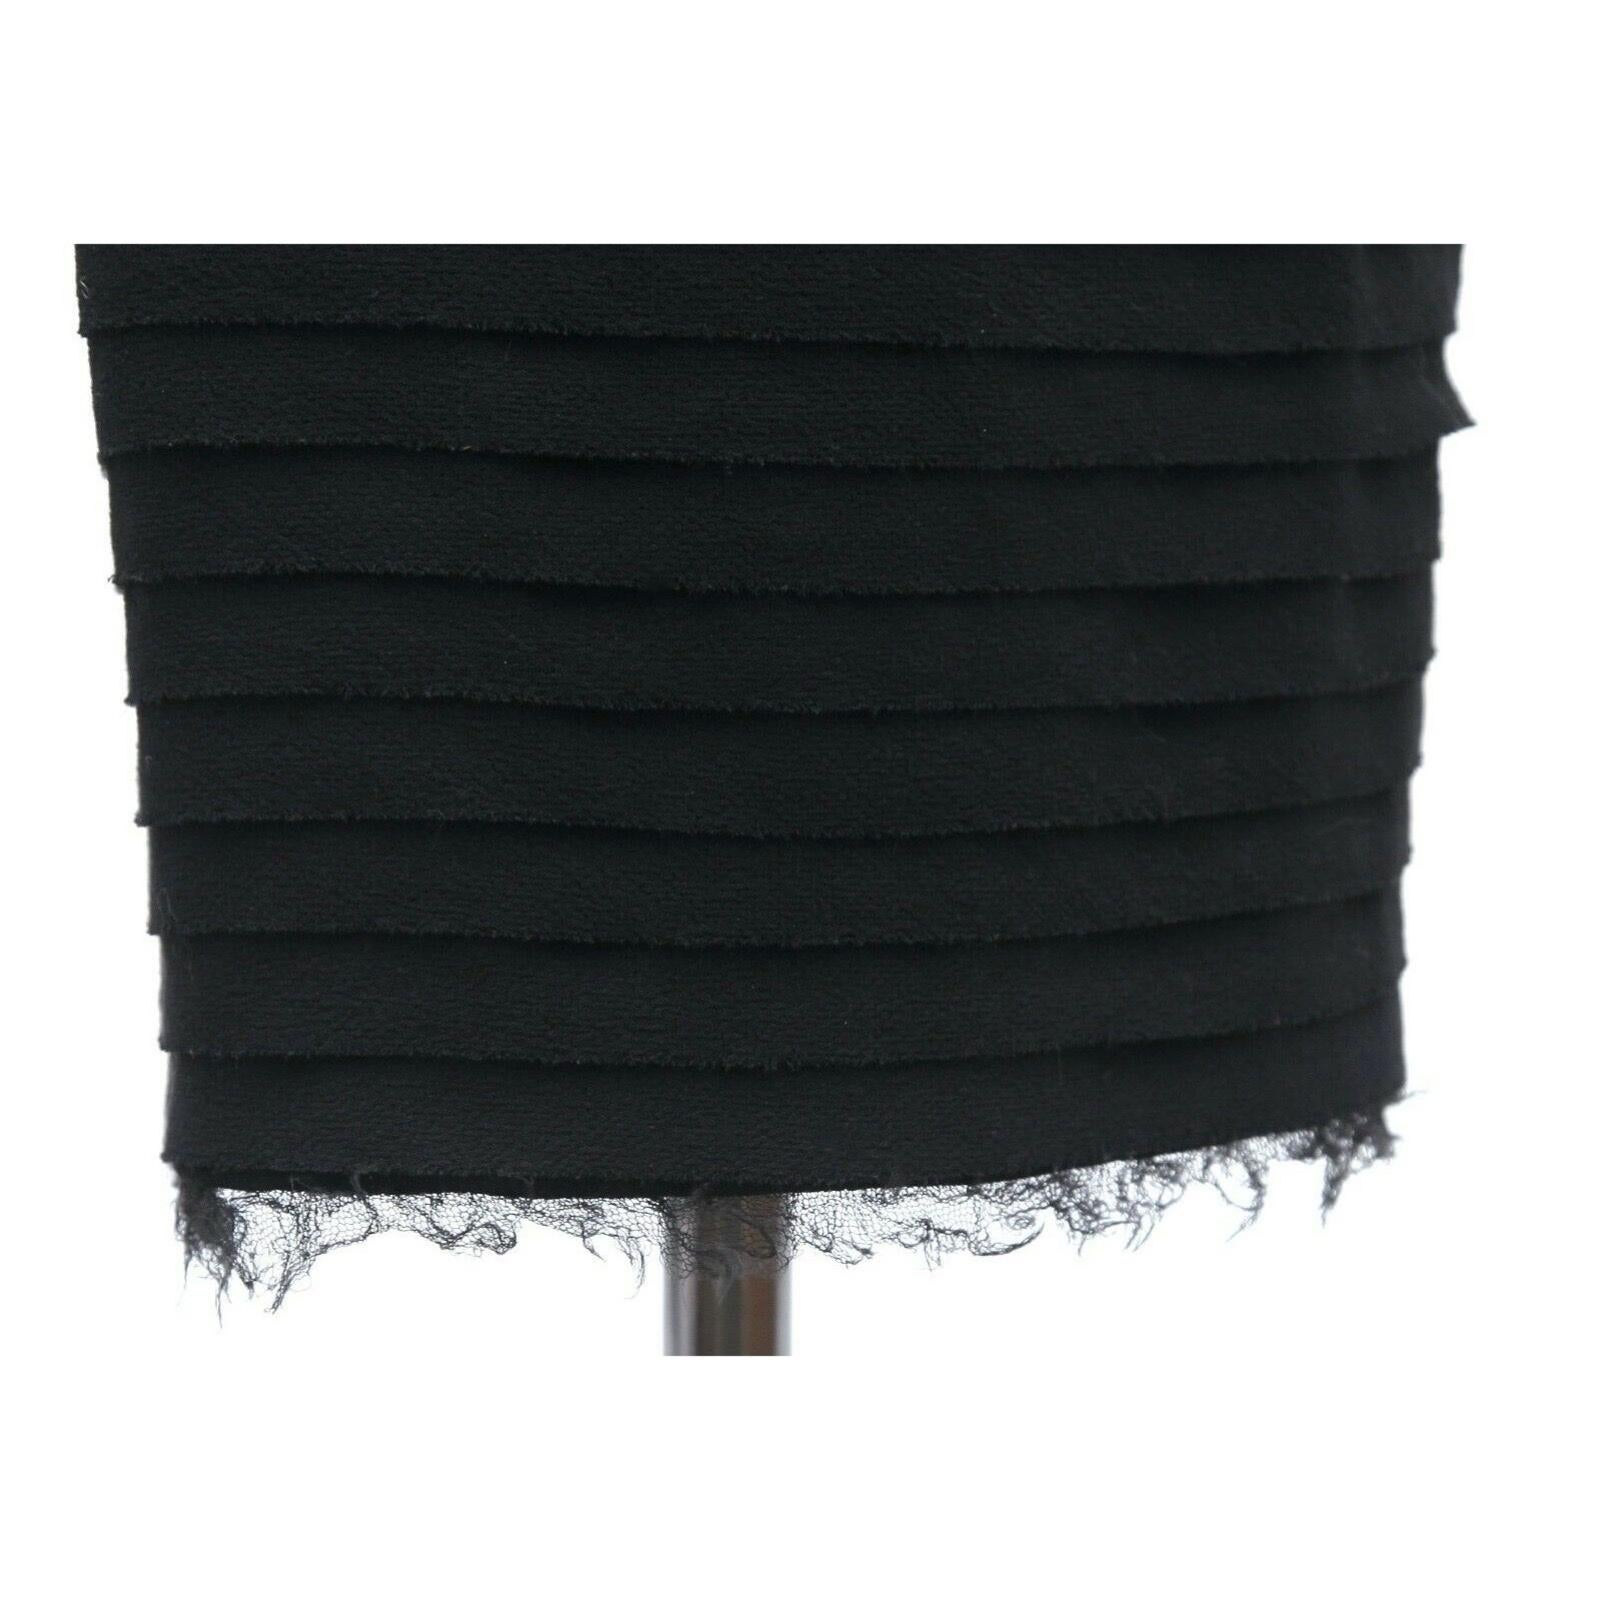 CHANEL Dress Cap Sleeve Black Cocktail Evening Tiered Bow Sheath Wool Sz 38 In Good Condition For Sale In Hollywood, FL